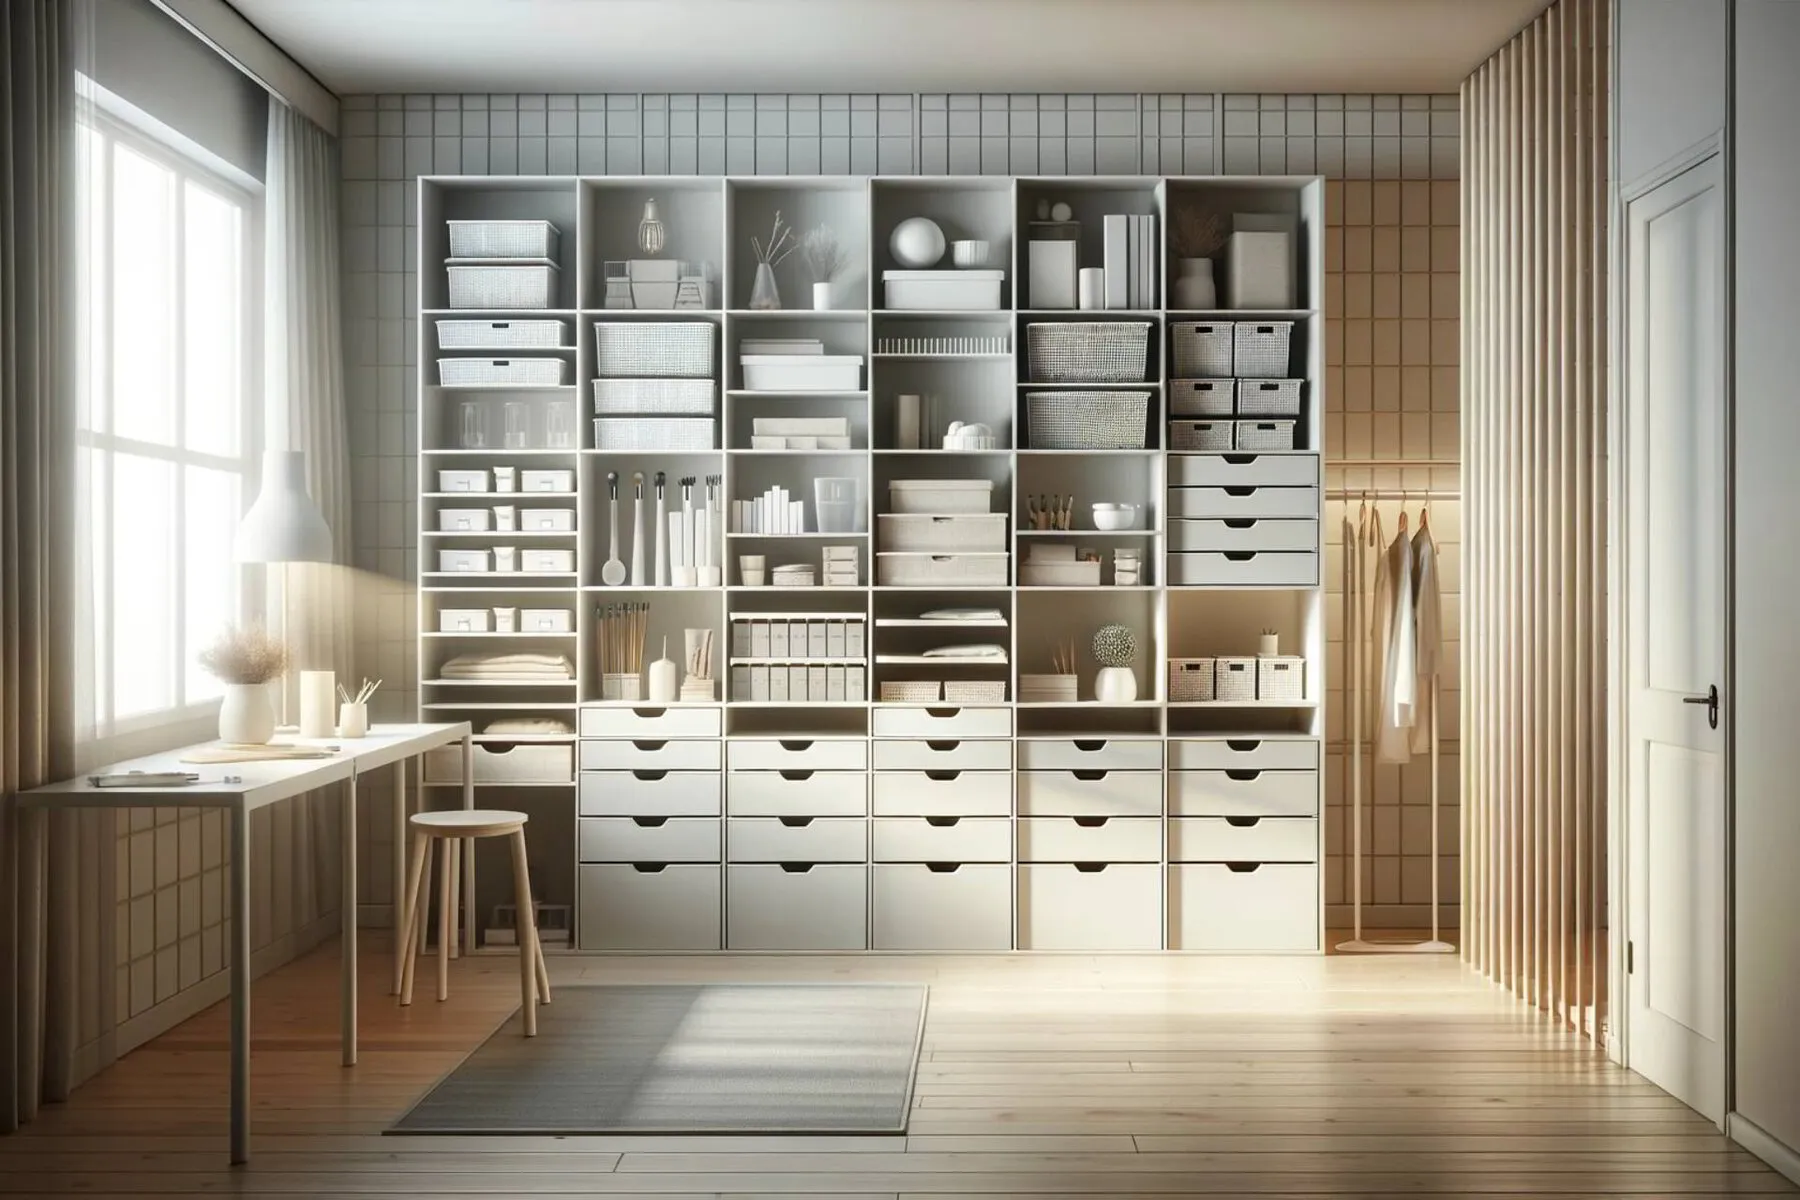 room with a simplified organizational system, maintaining a clean and orderly appearance with less clutter